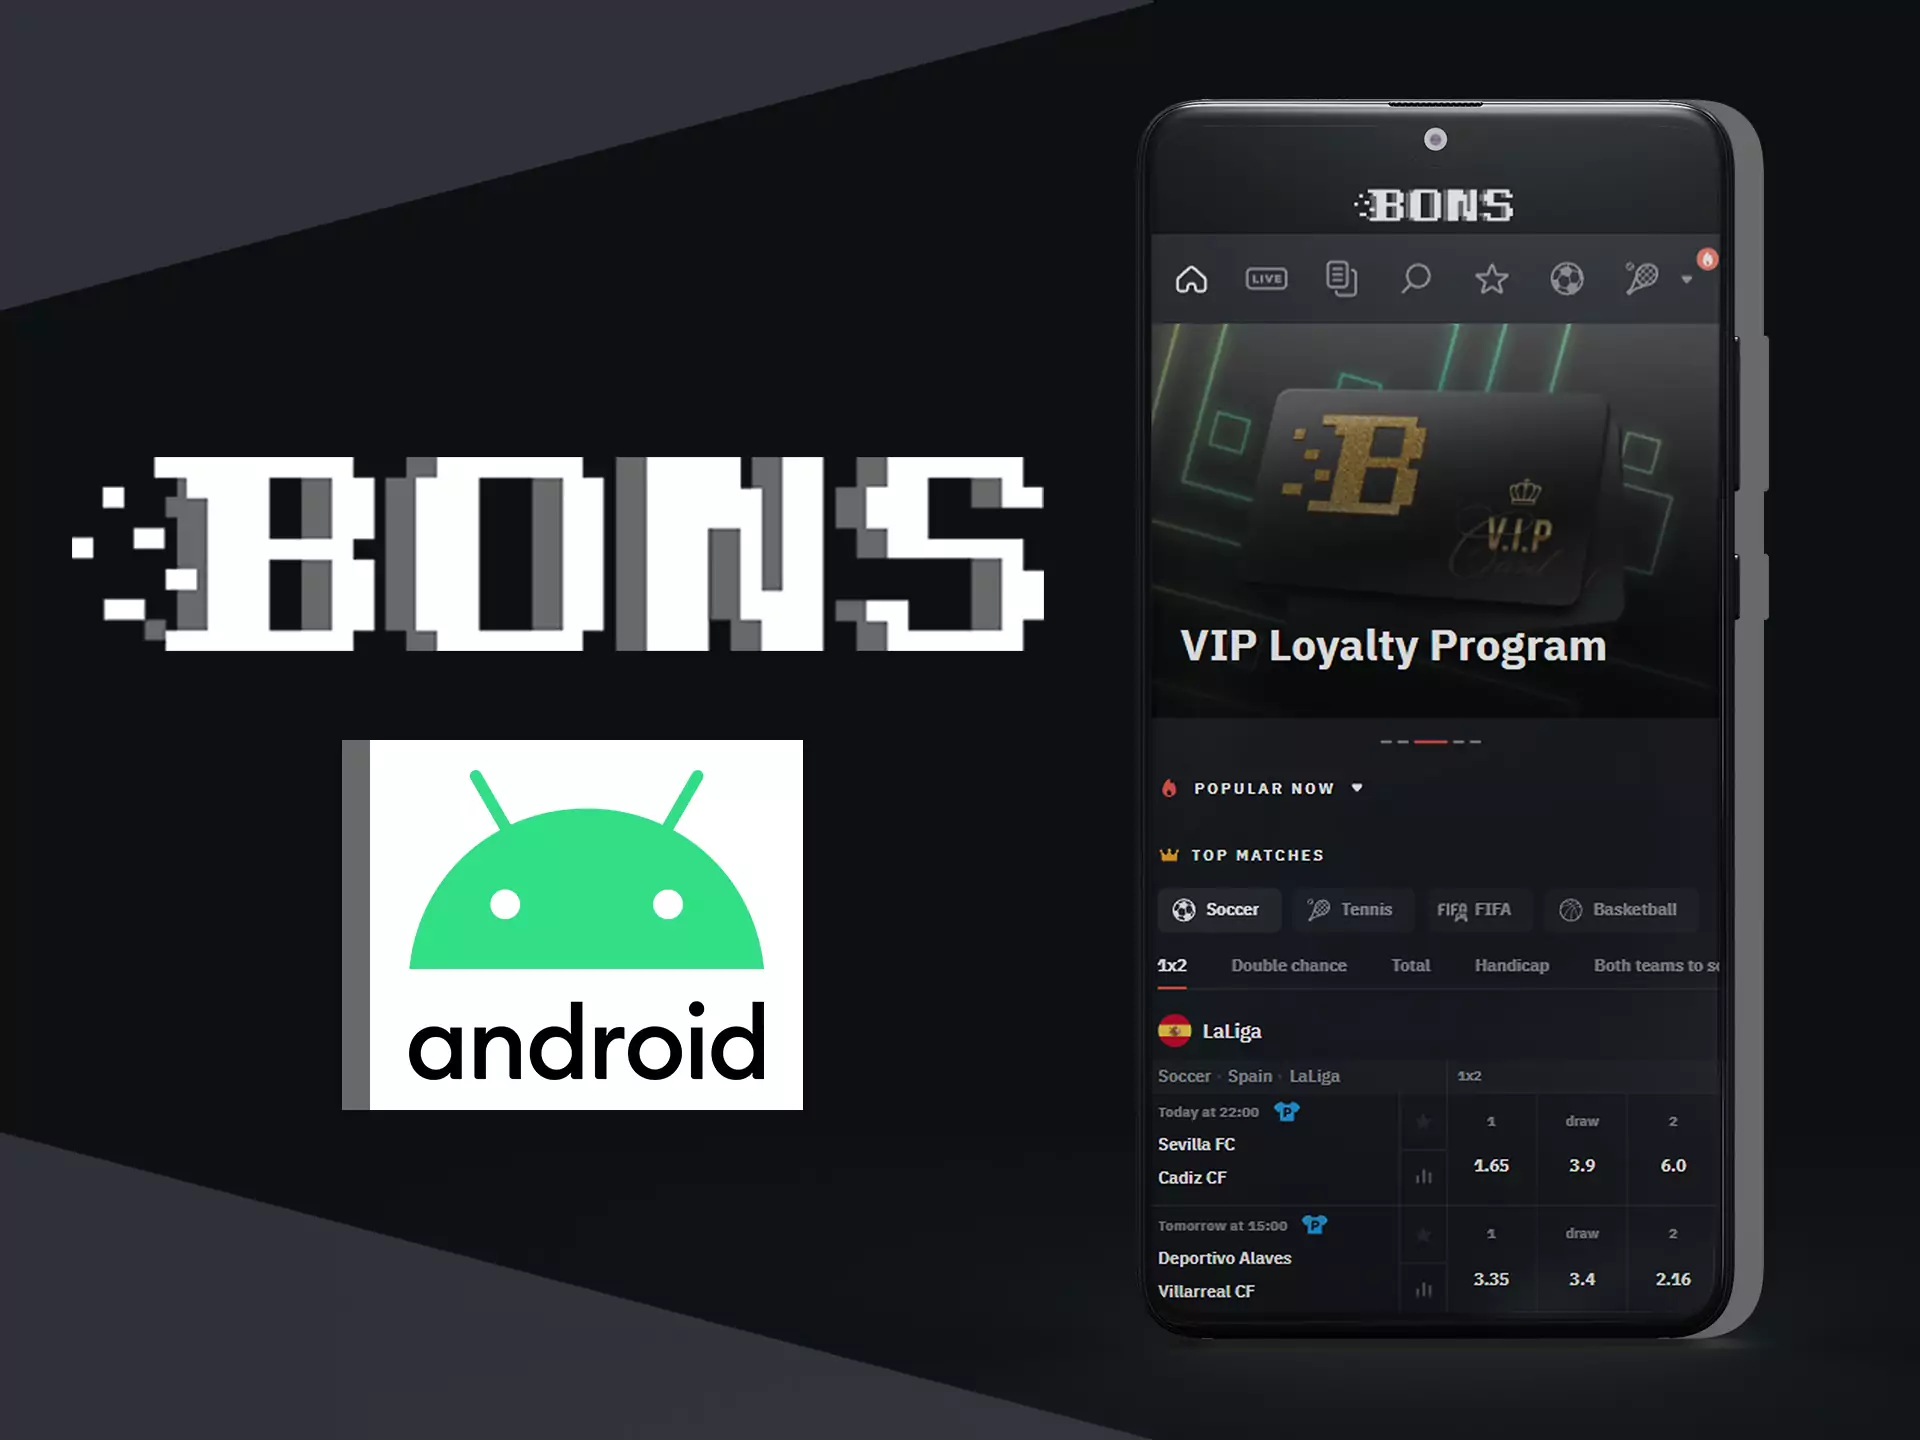 Download Bons APK from the bookmaker's official website.